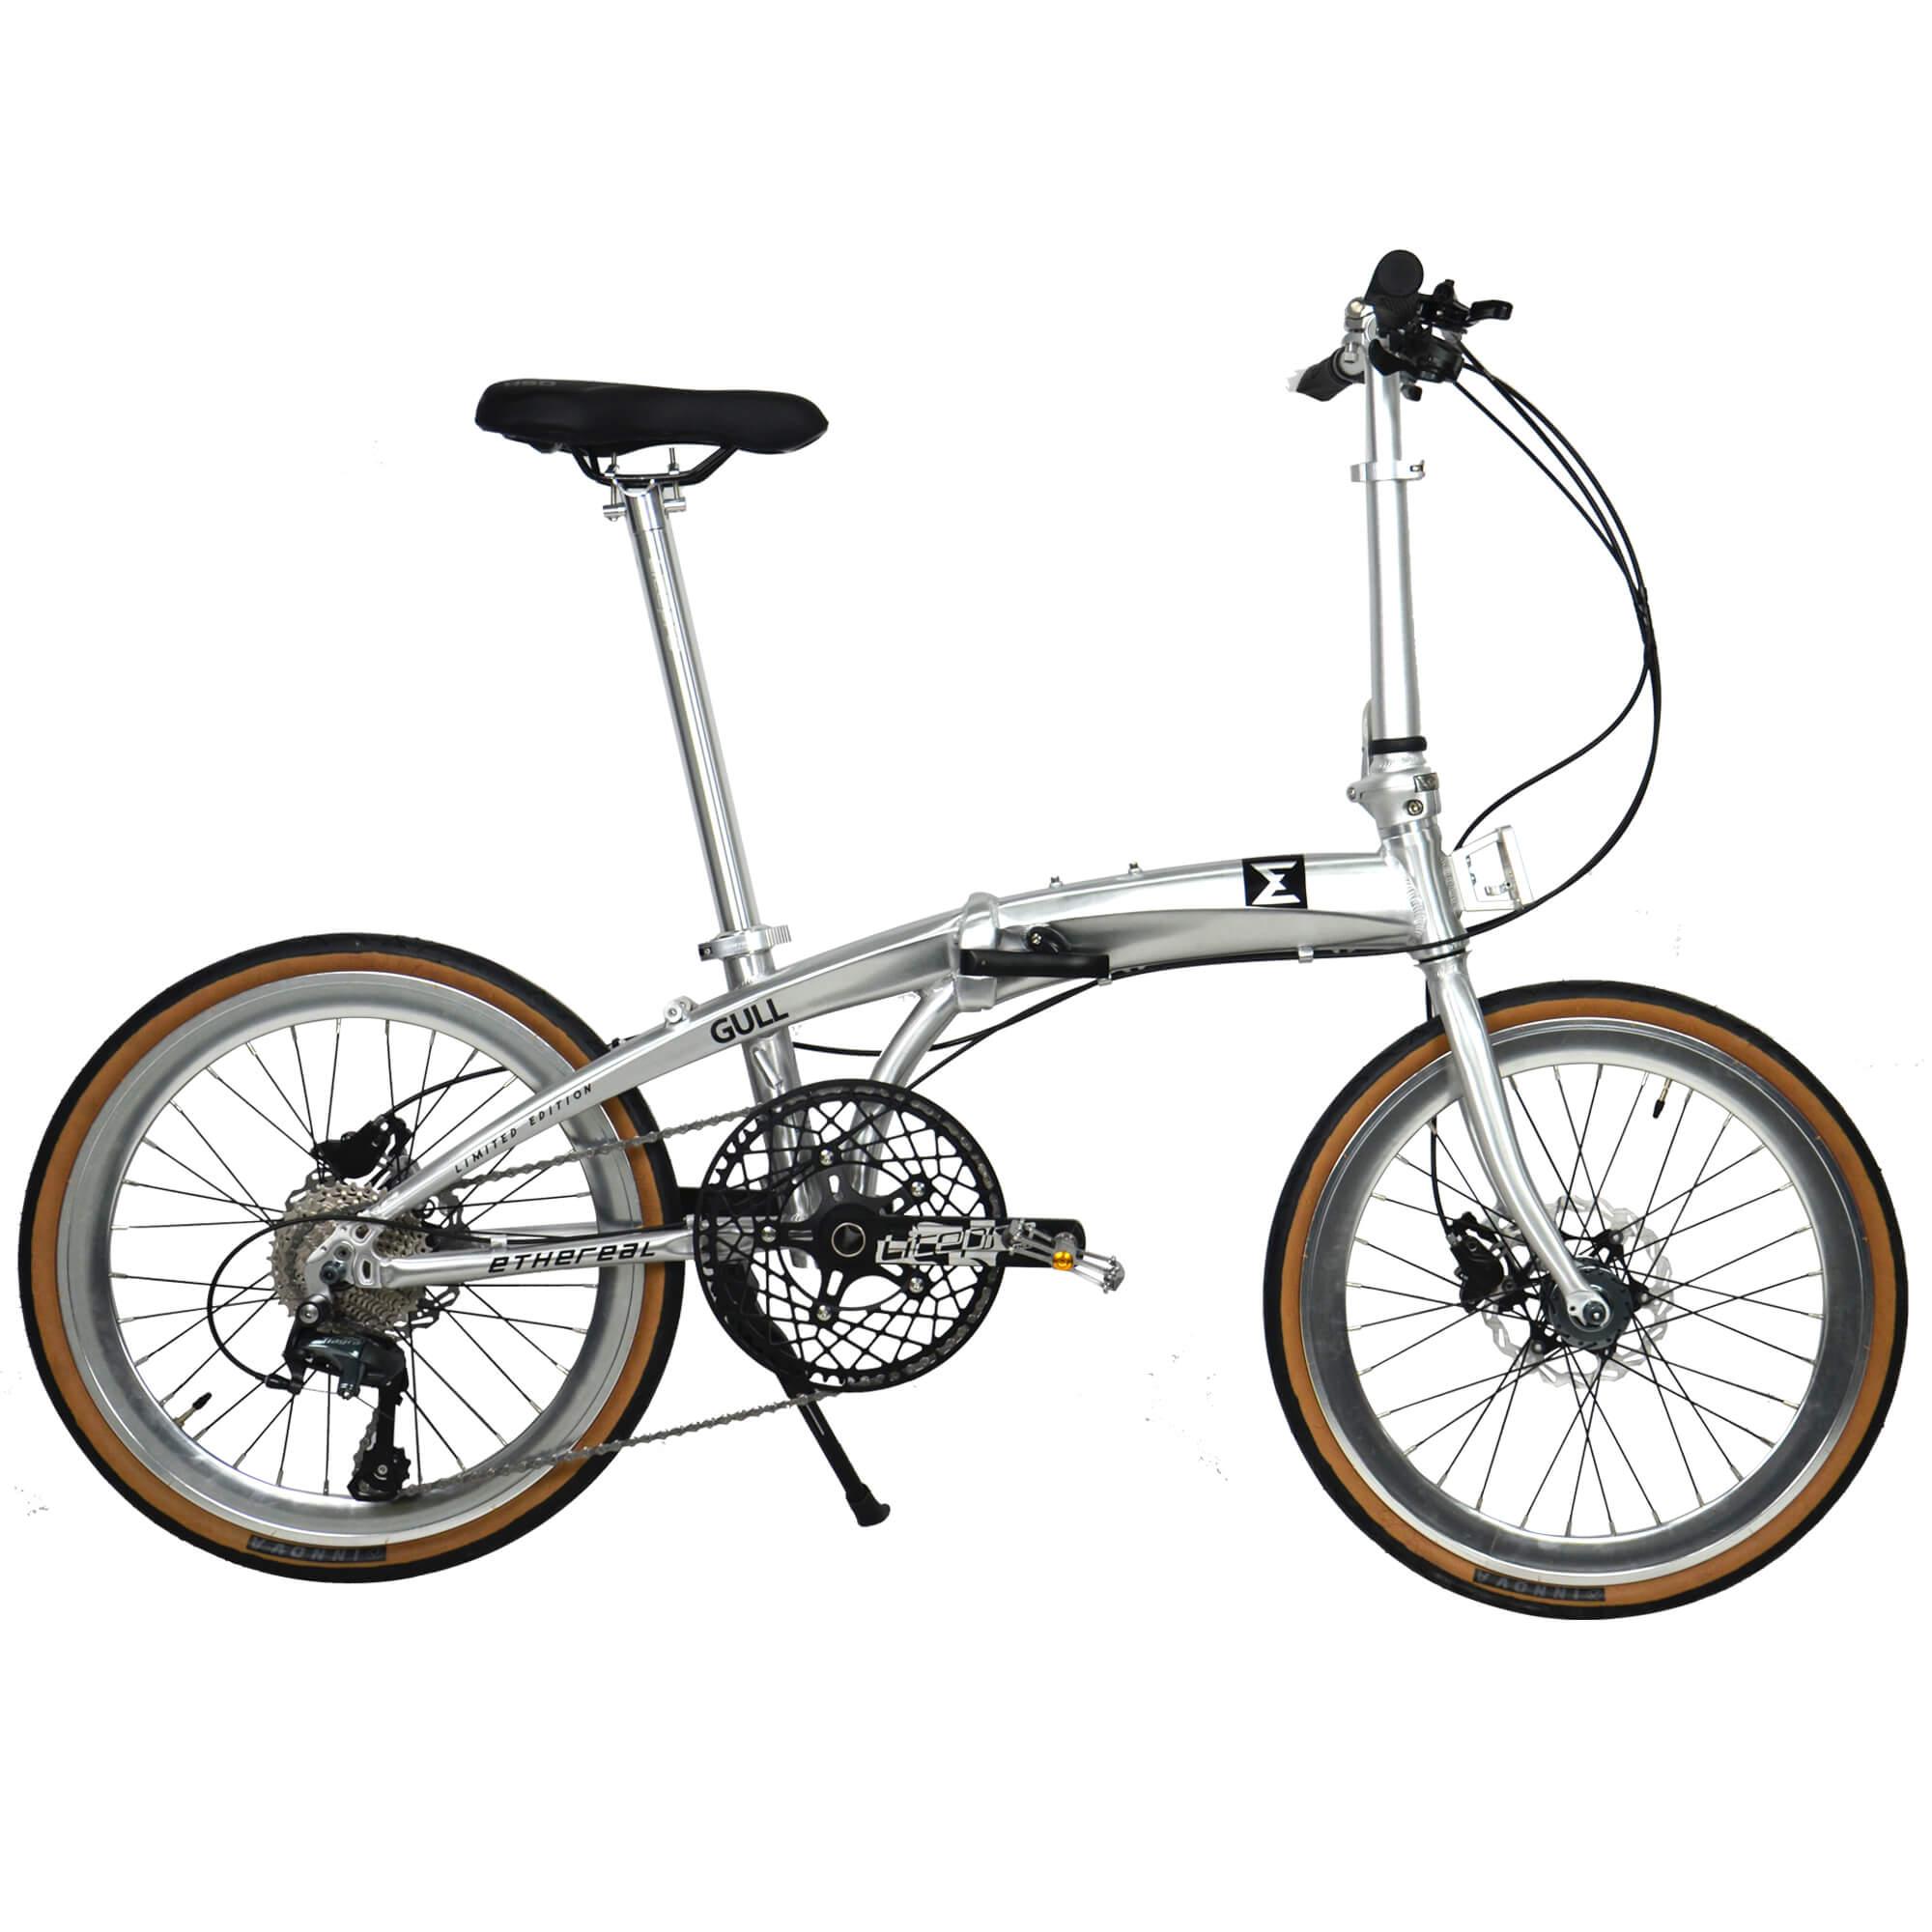 Experience the ultimate ride with the Ethereal Gull foldable bicycle - top-of-the-line quality with premium components, including Shimano Tiagra 10-speed derailleur, Shimano MT200 full hydraulic disc brakes, and lightweight carbon wheelset - The Bike Atrium - Best Bicycle Shop in Singapore